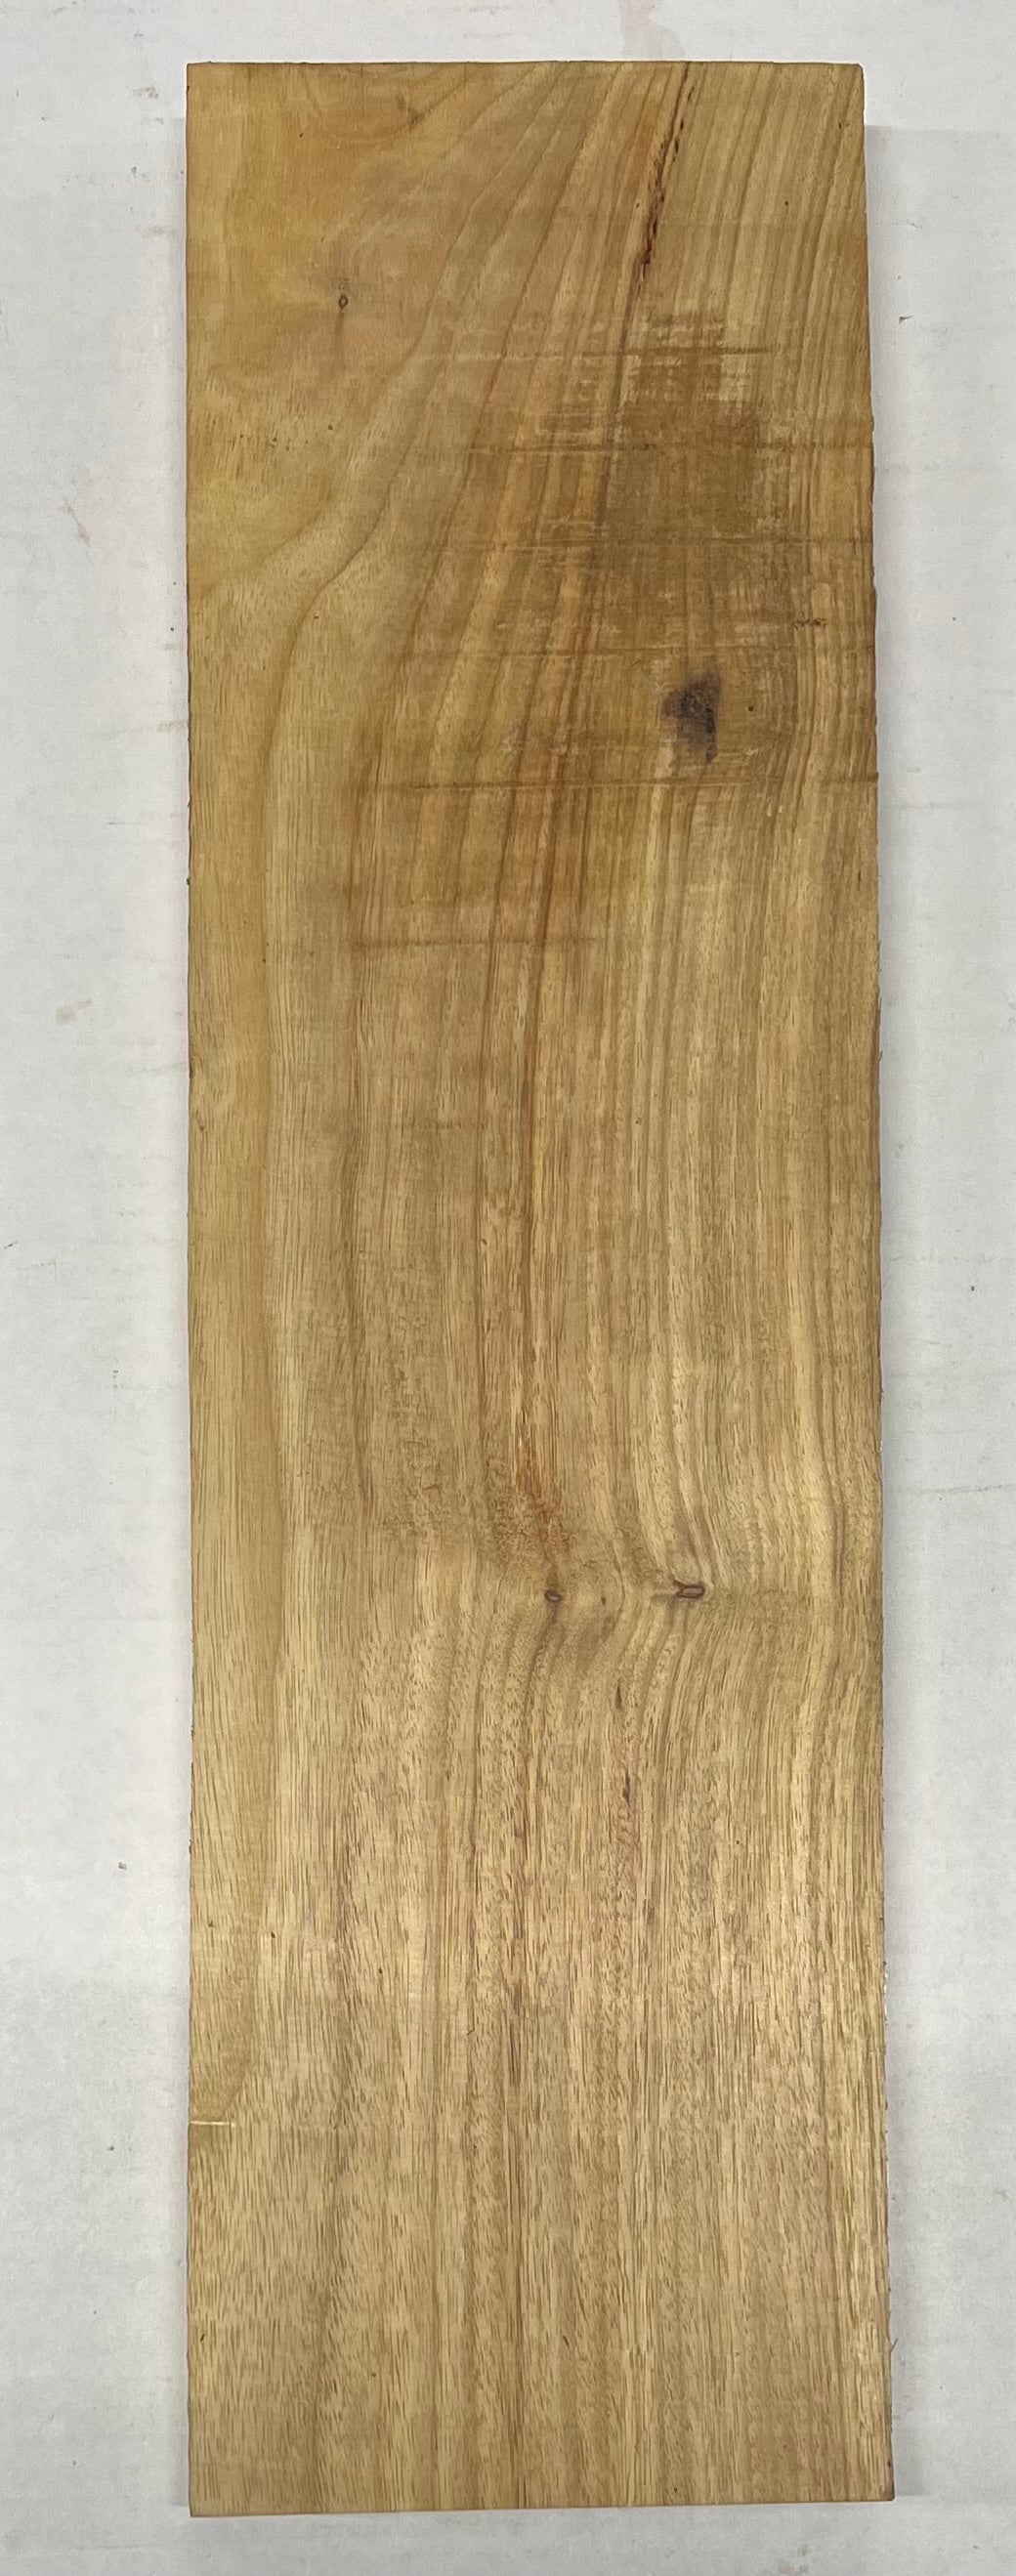 Canarywood Thin Stock Three Dimensional Lumber Board 21-1/2&quot;x6&quot;x1&quot; 